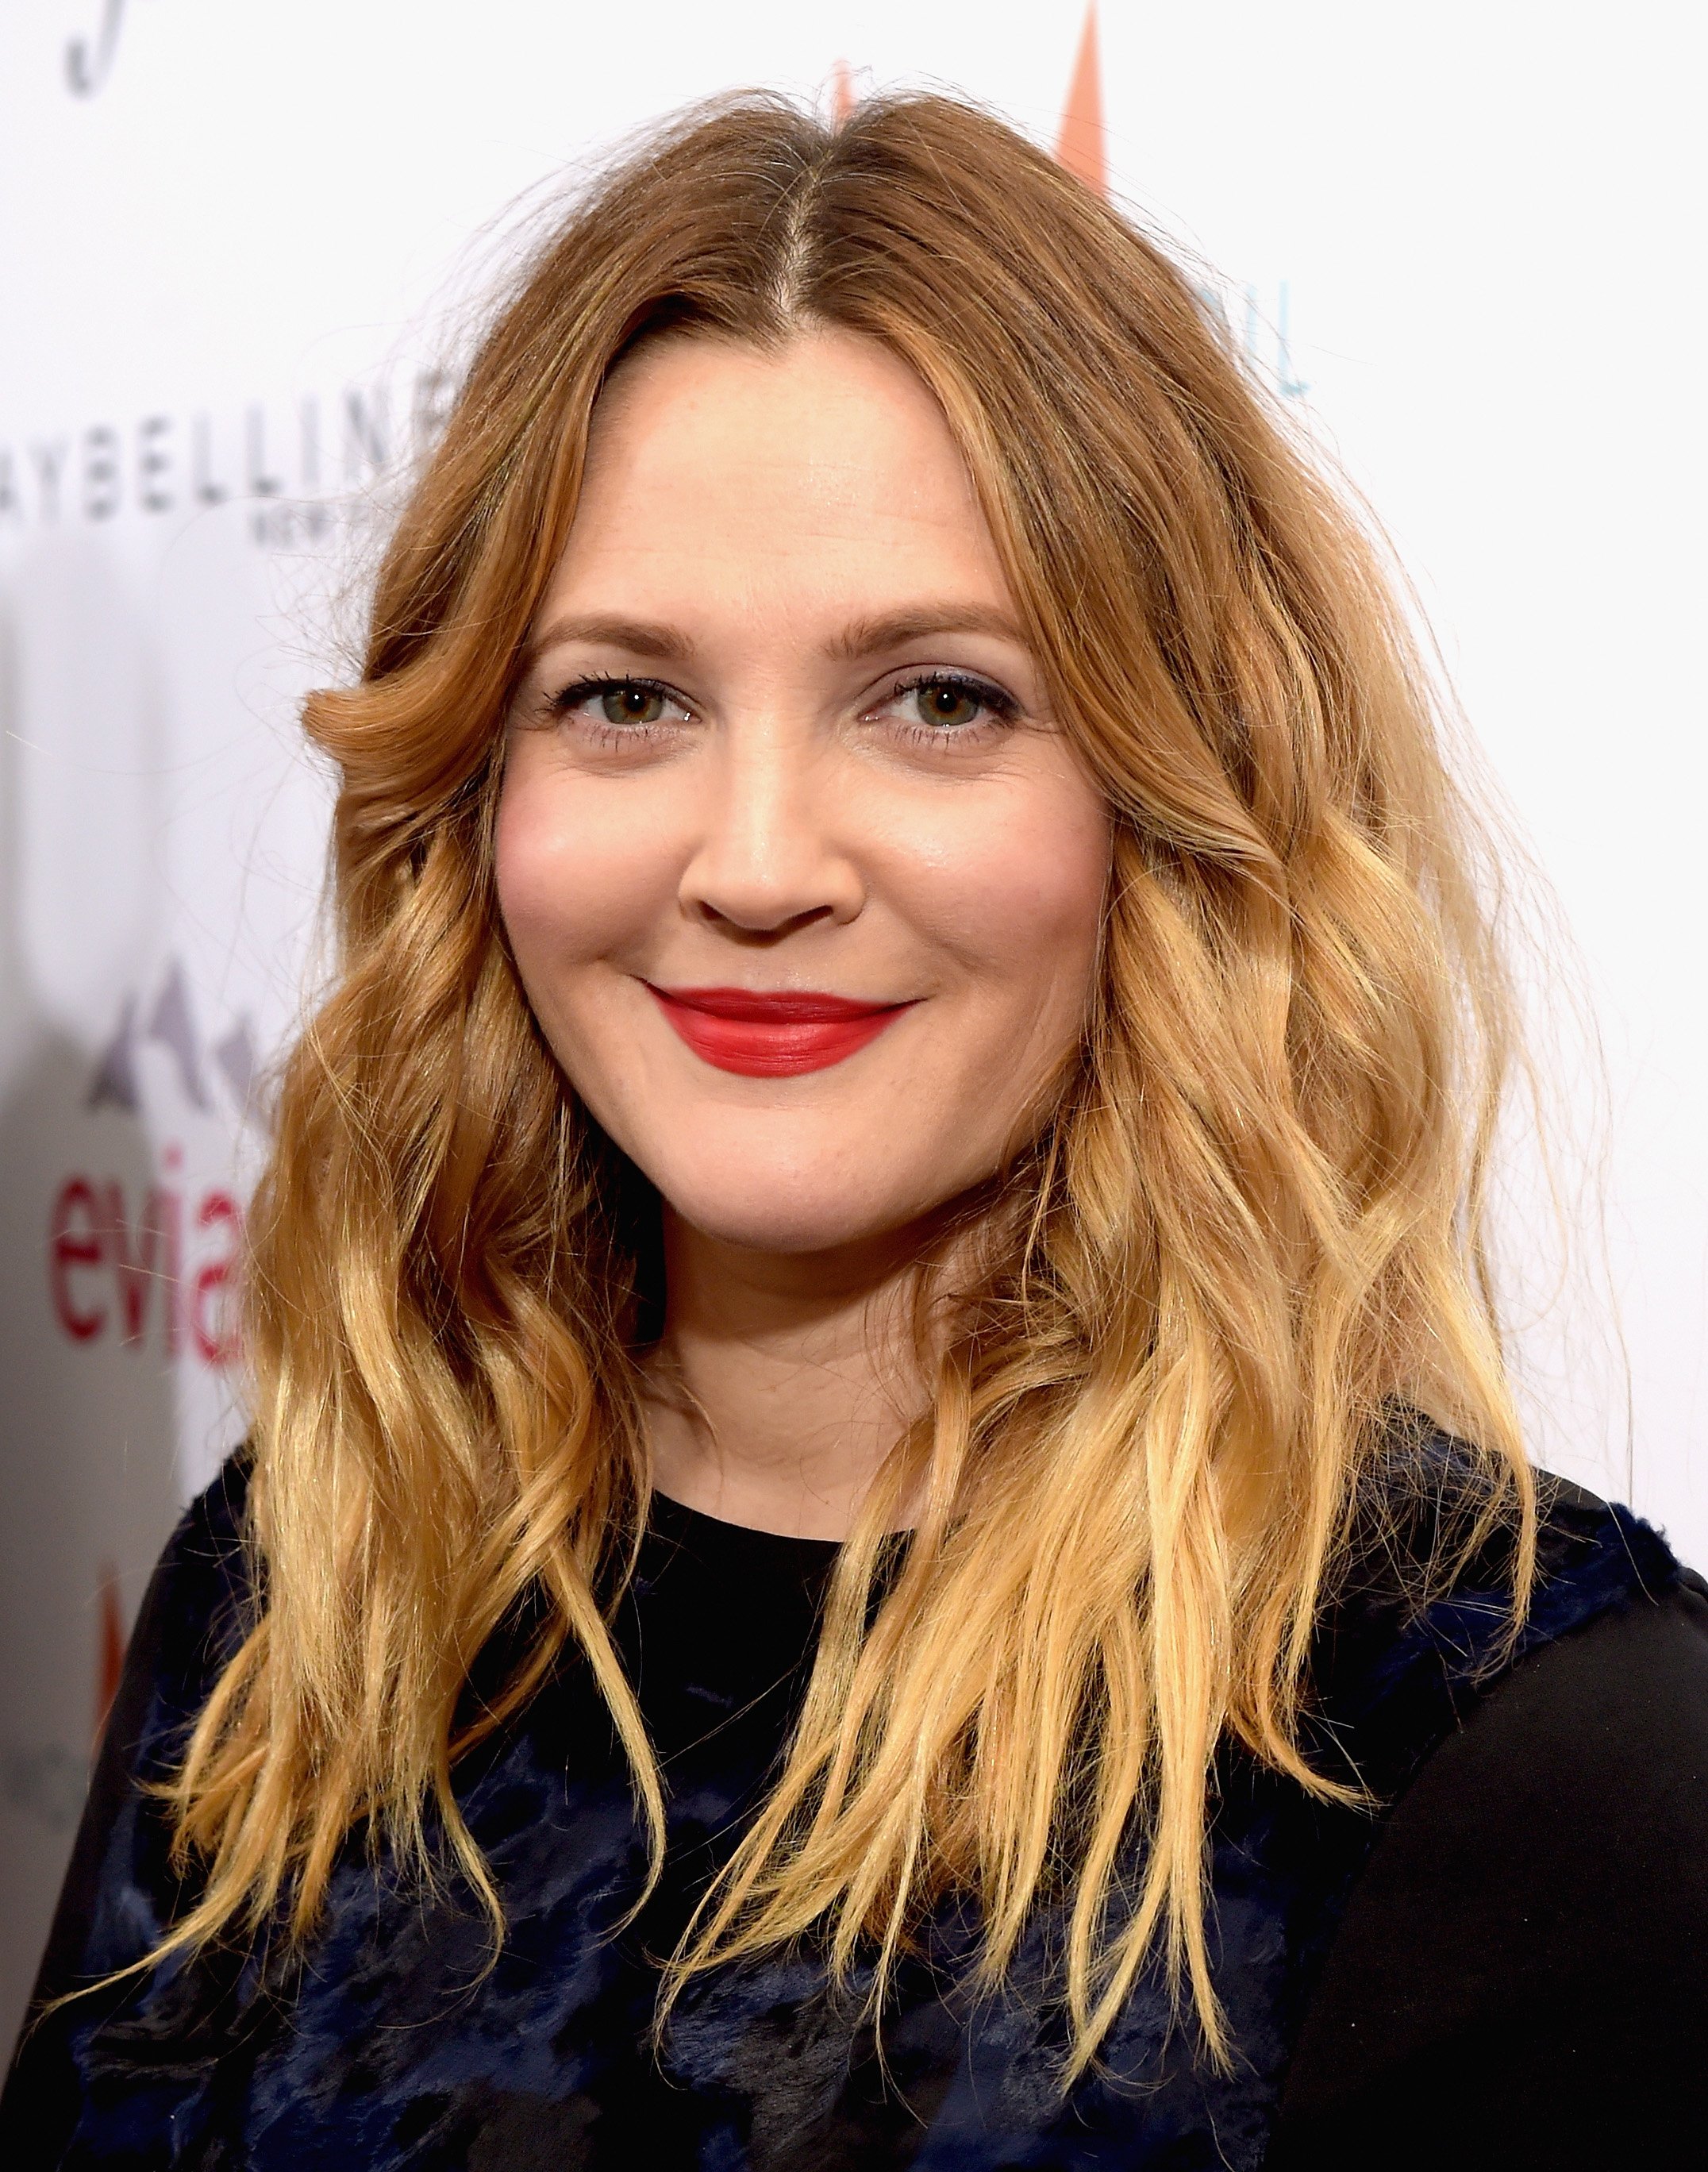 Actress Drew Barrymore attends The DAILY FRONT ROW "Fashion Los Angeles Awards" Show at Sunset Tower on January 22, 2015 in West Hollywood, California. | Source: Getty Images